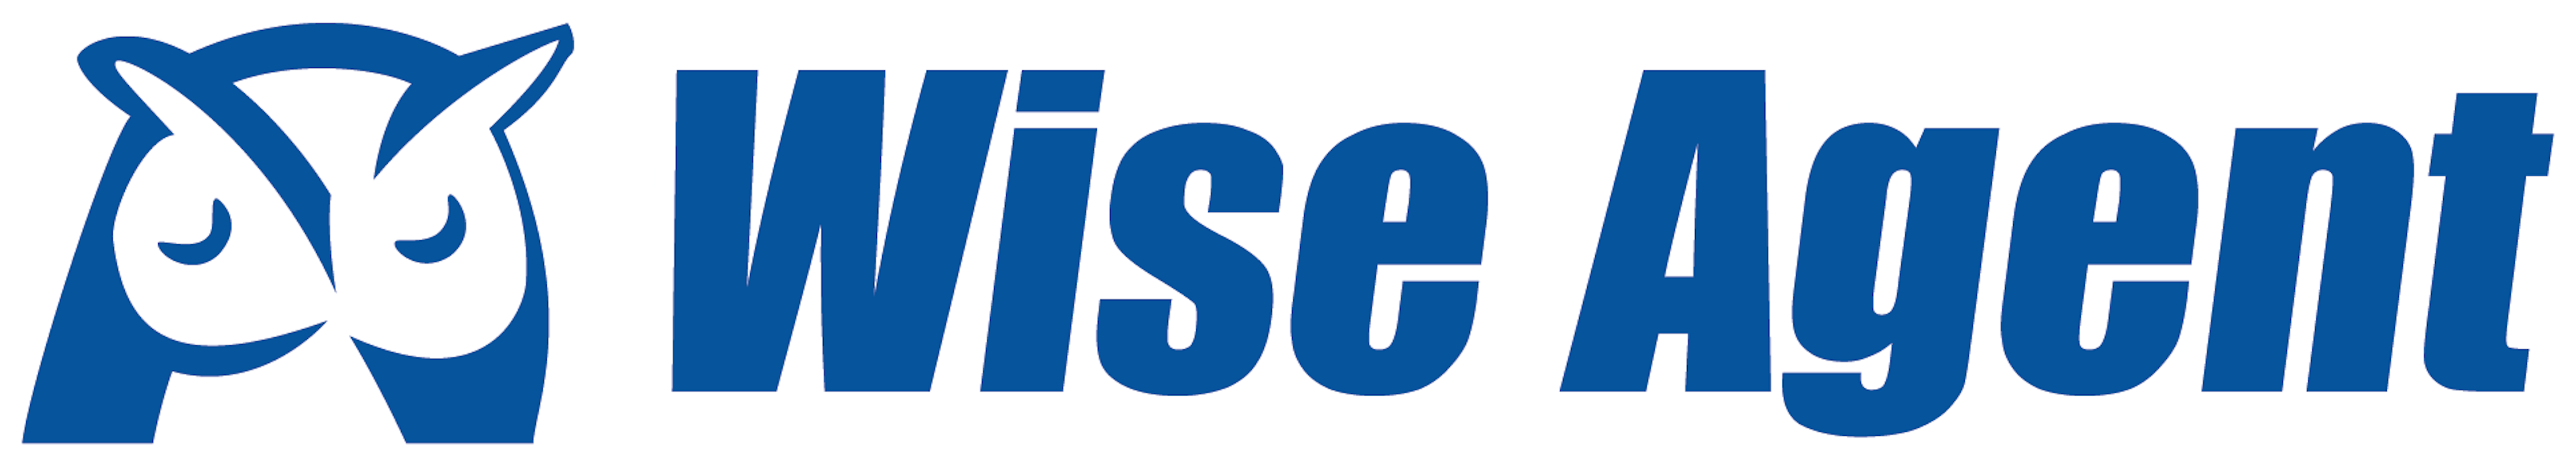 Wise Agent Logo